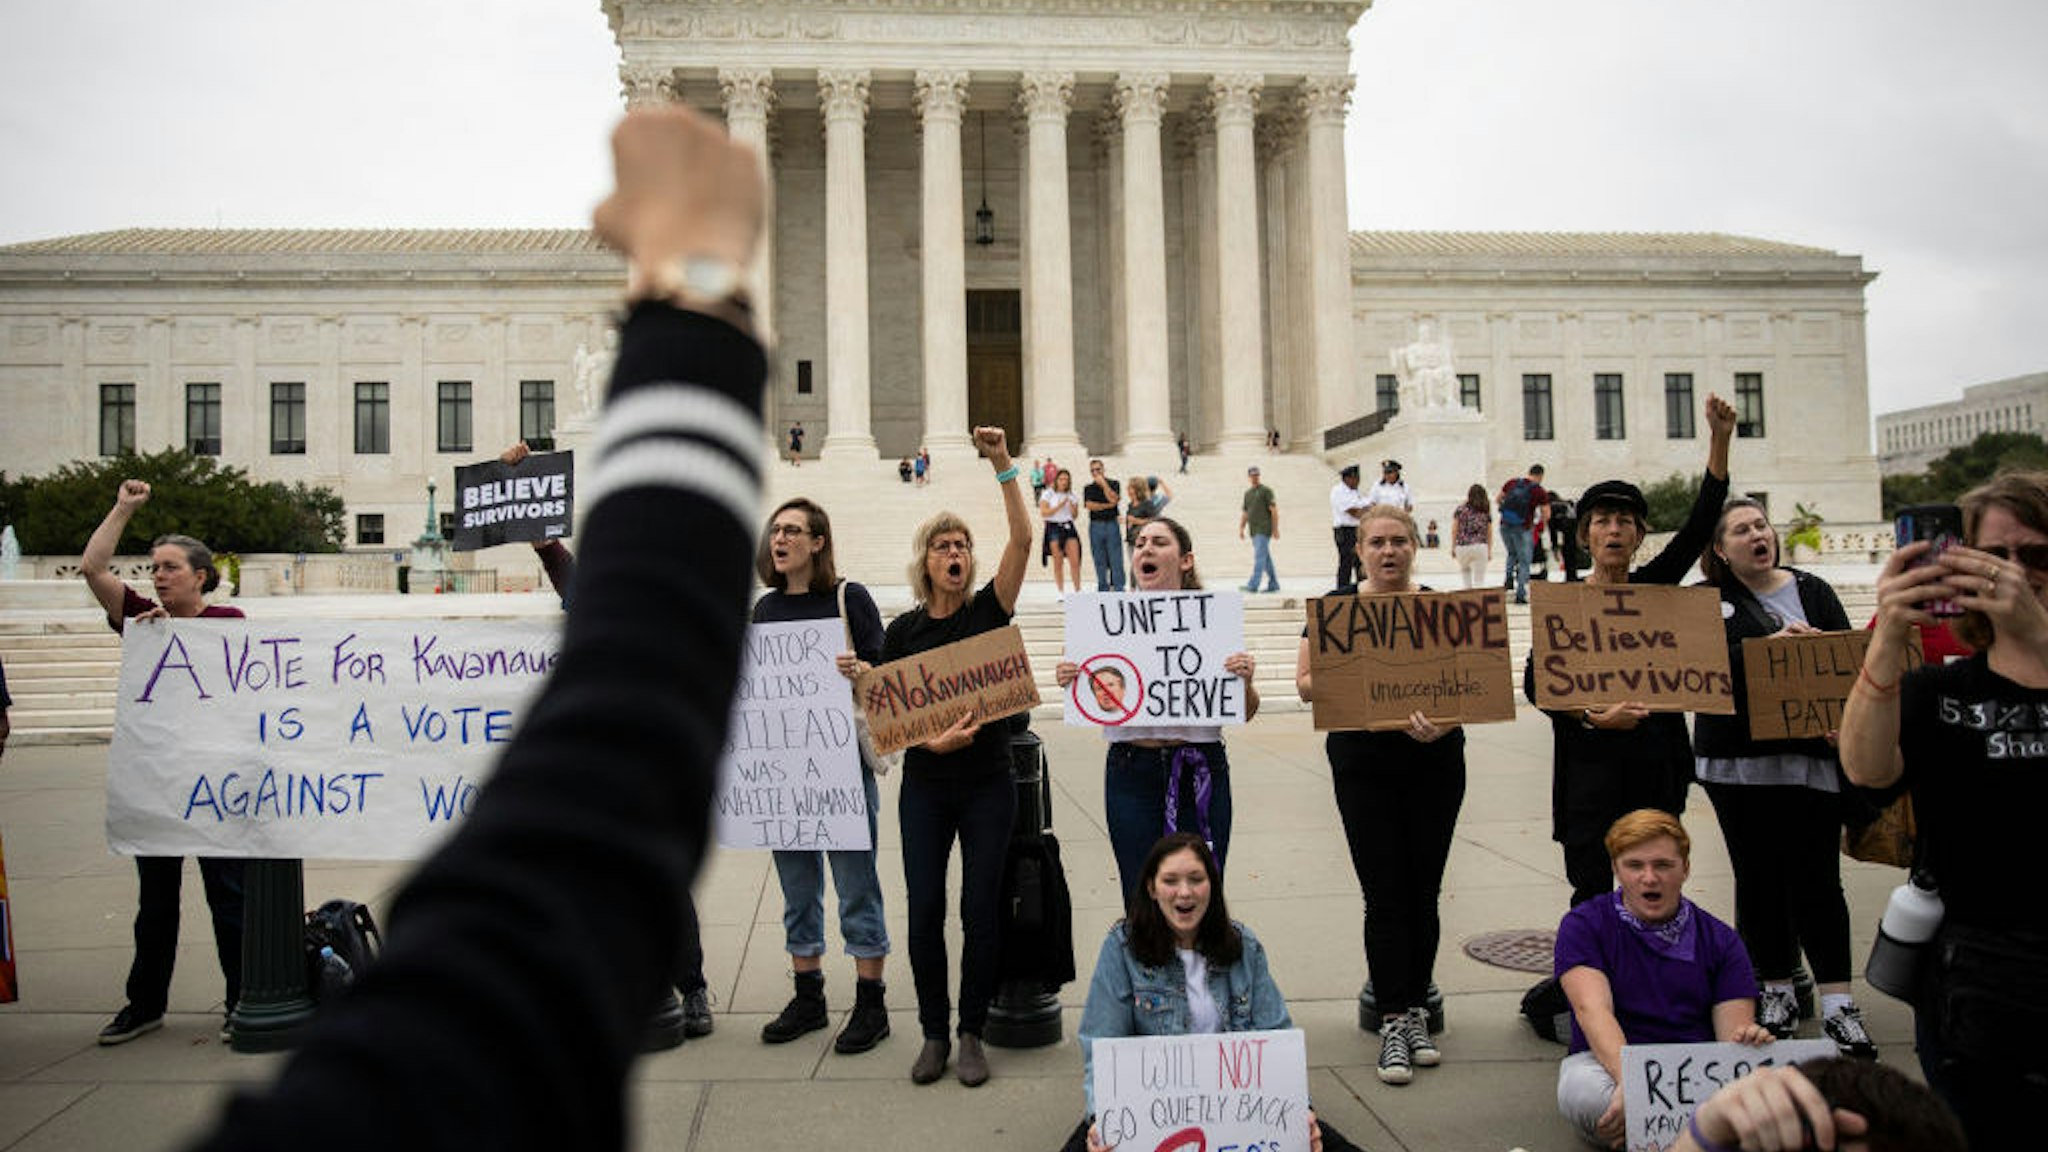 WASHINGTON, DC - OCTOBER 6: Protesters rally against the confirmation of Supreme Court nominee Judge Brett Kavanaugh, outside of the Supreme Court, October 6, 2018 in Washington, DC. The Senate is set to hold a final vote Saturday evening to confirm the nomination of Judge Brett Kavanaugh to the U.S. Supreme Court.